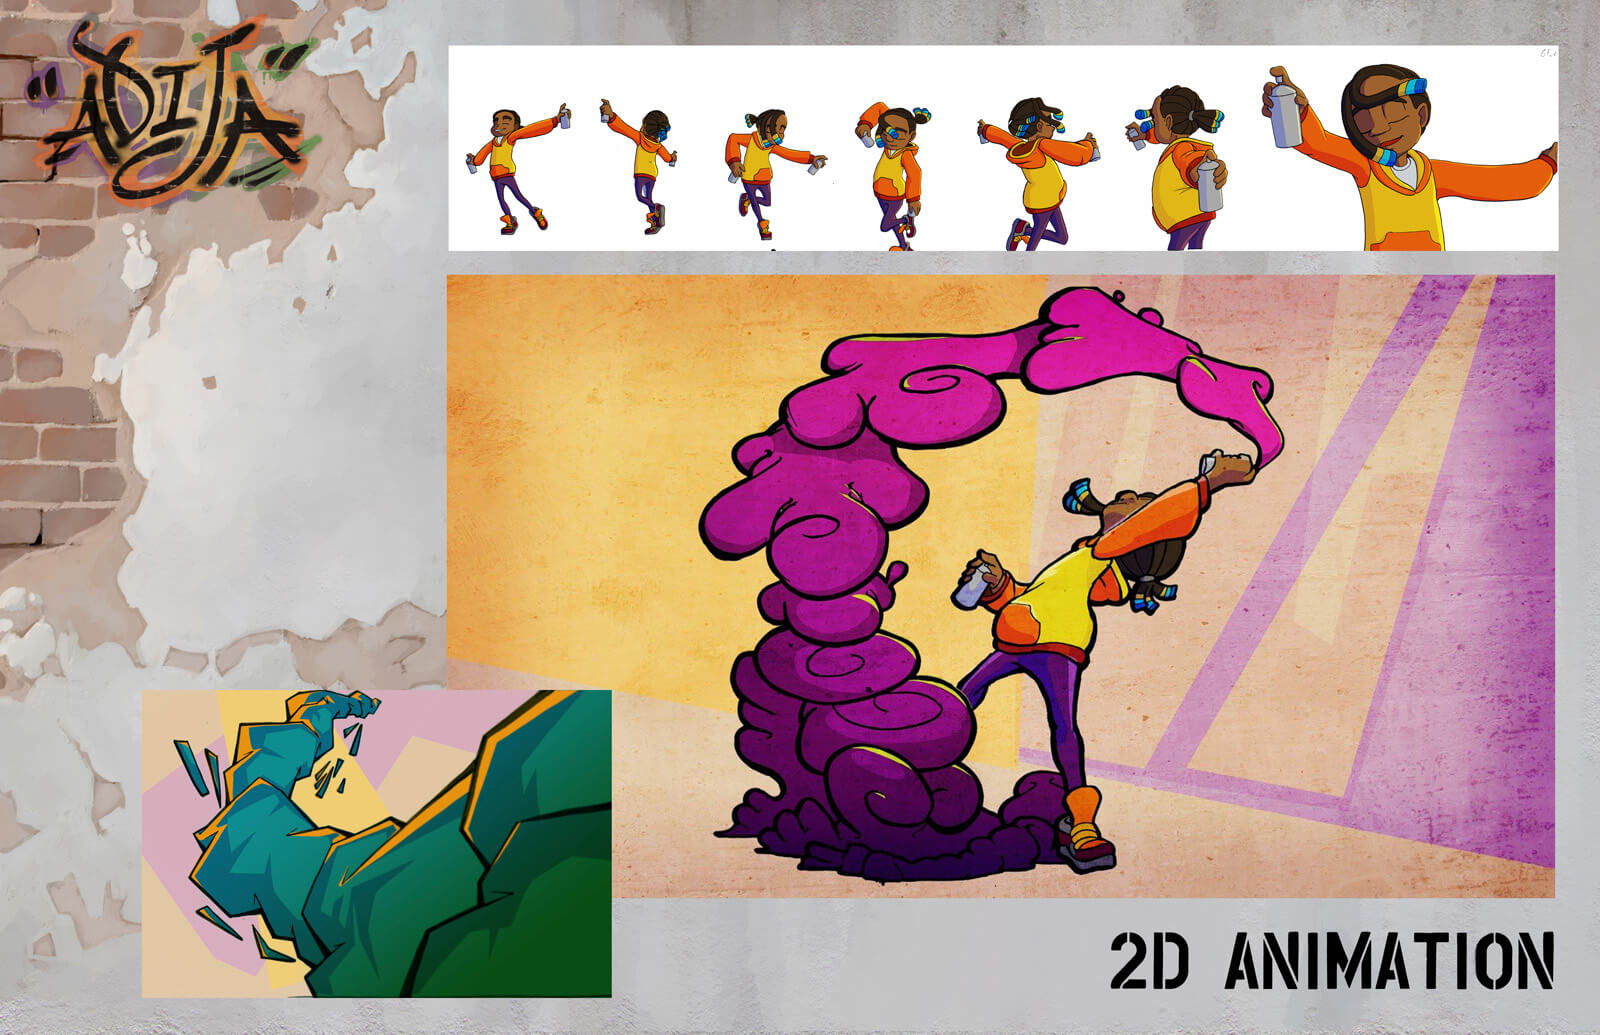 2D animation sheet depicting a young girl in the middle of spray-painting her artwork